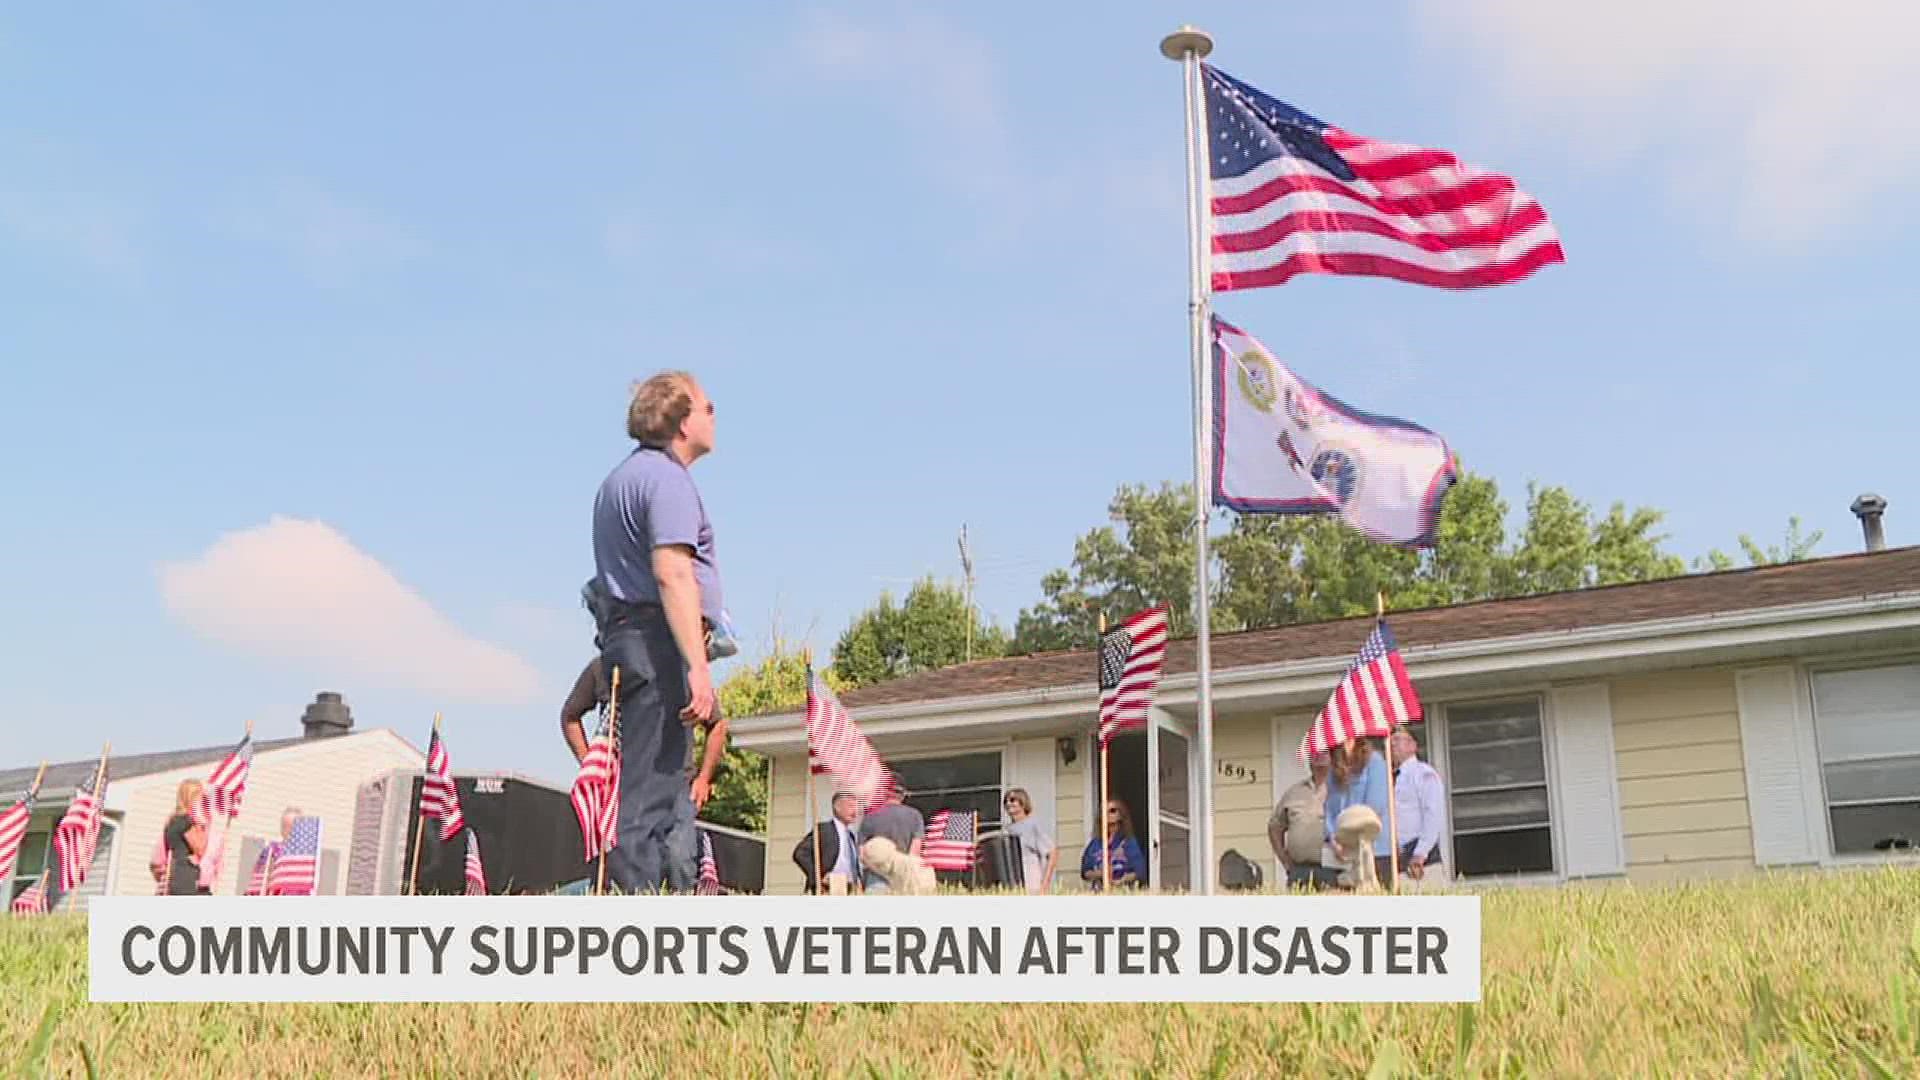 Last winter, the inside of the veteran's home was destroyed after his furnace broke and water pipes busted, leaving several feet of water inside.